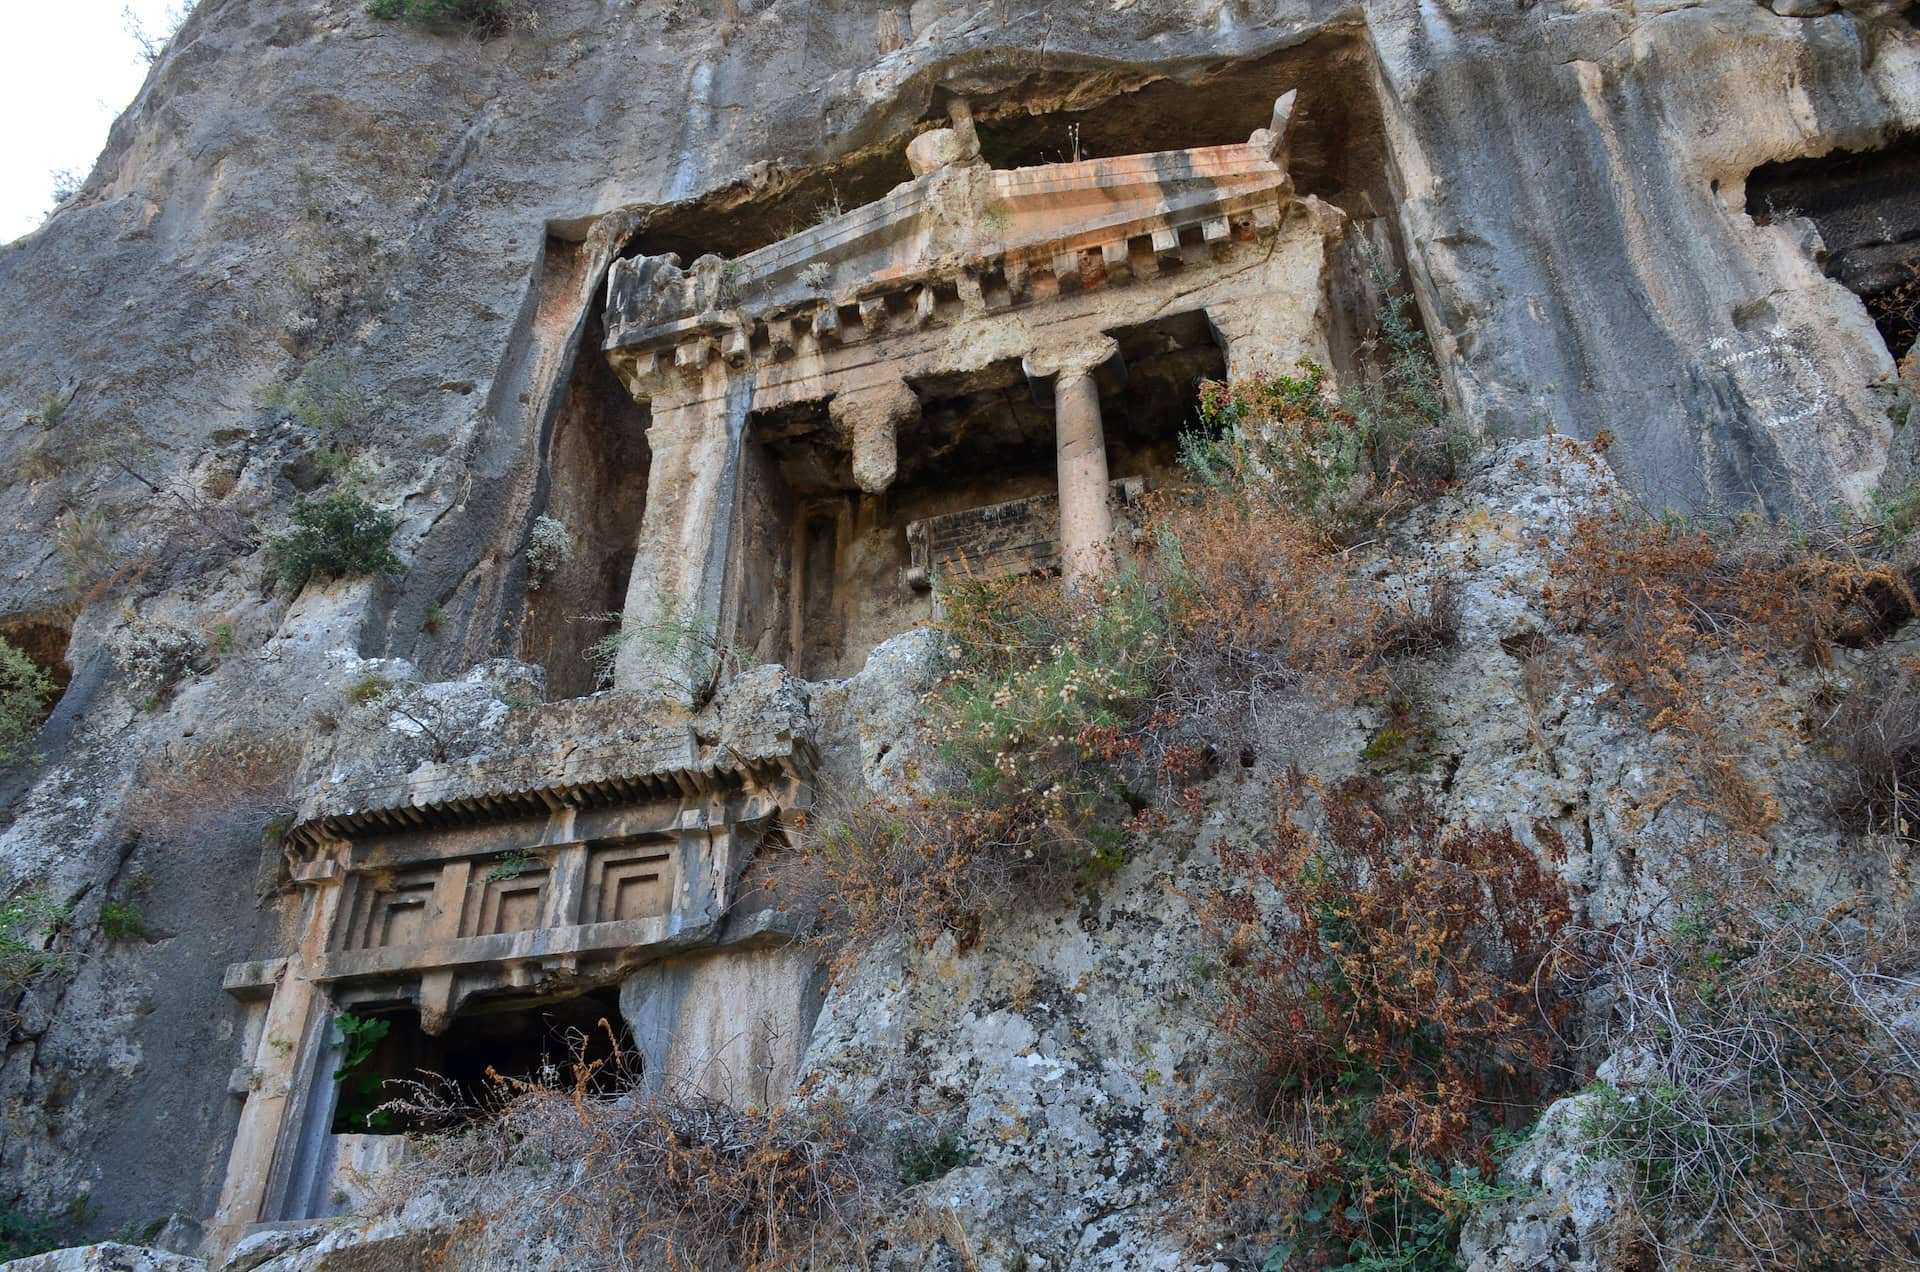 Temple-type tomb at the Amyntas Rock Tombs in Fethiye, Turkey